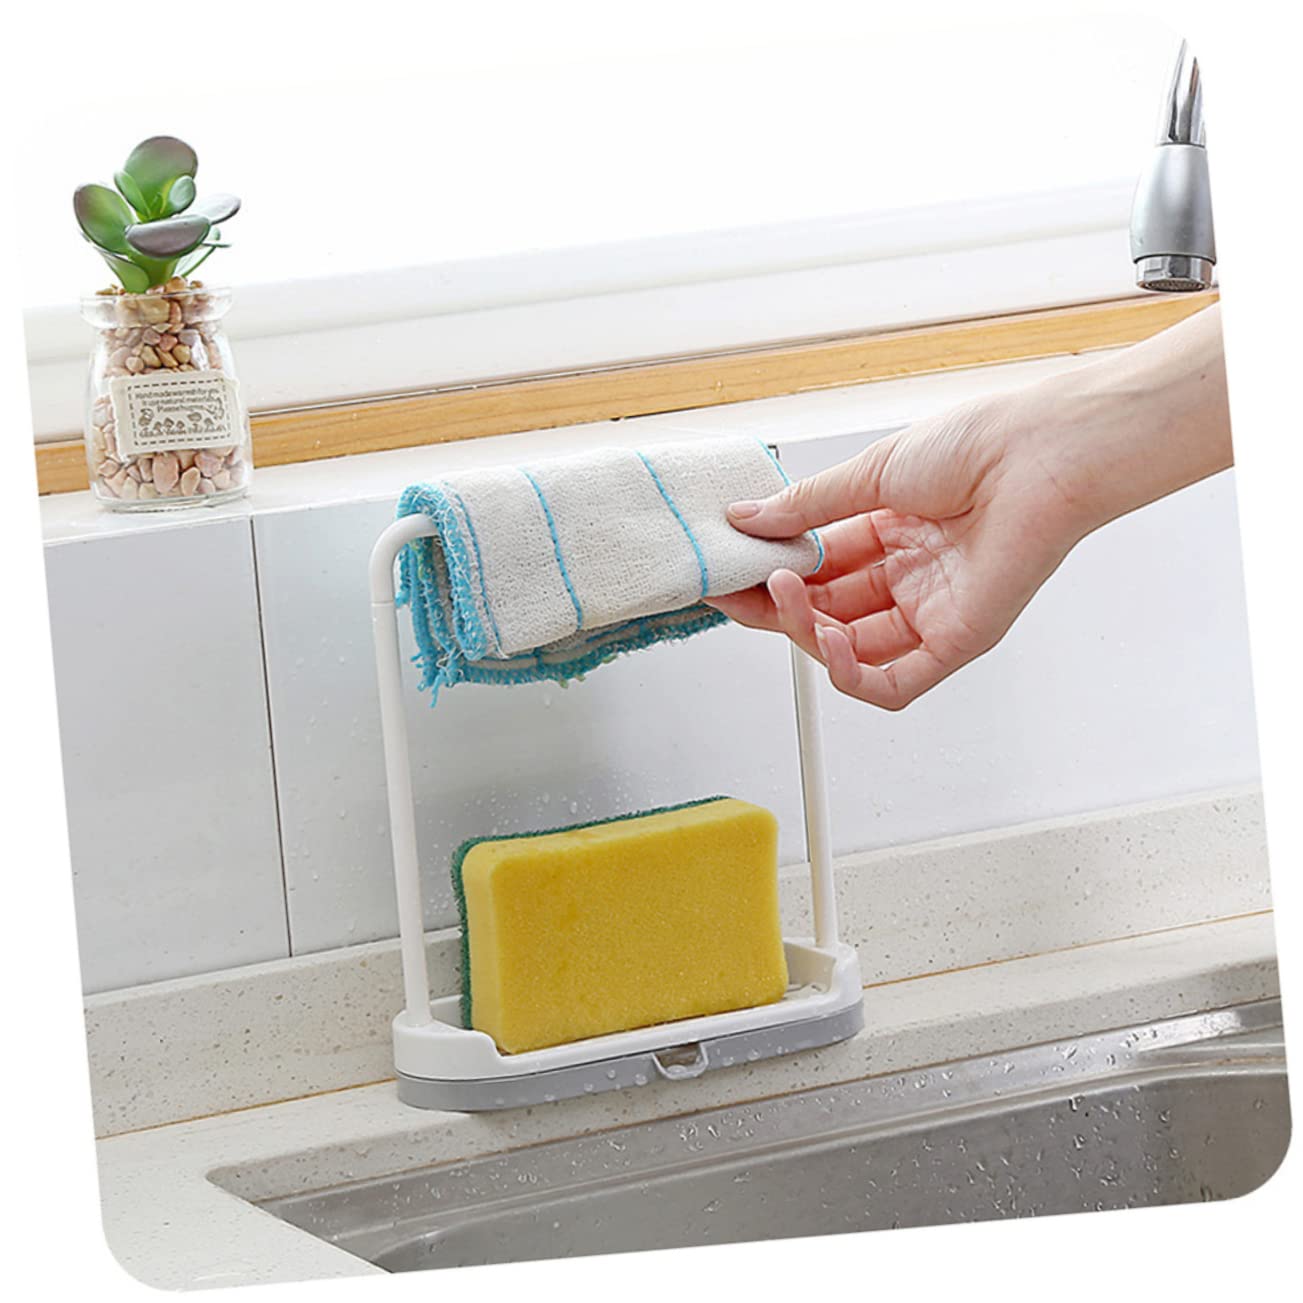 Sink Drying Dual- Dish Organizer Dishcloth for Soap Removable Rack Plastic and Sponge Cloth Brush Rackgrey Rag Storage Kitchen Stands with Countertop Holder Grey